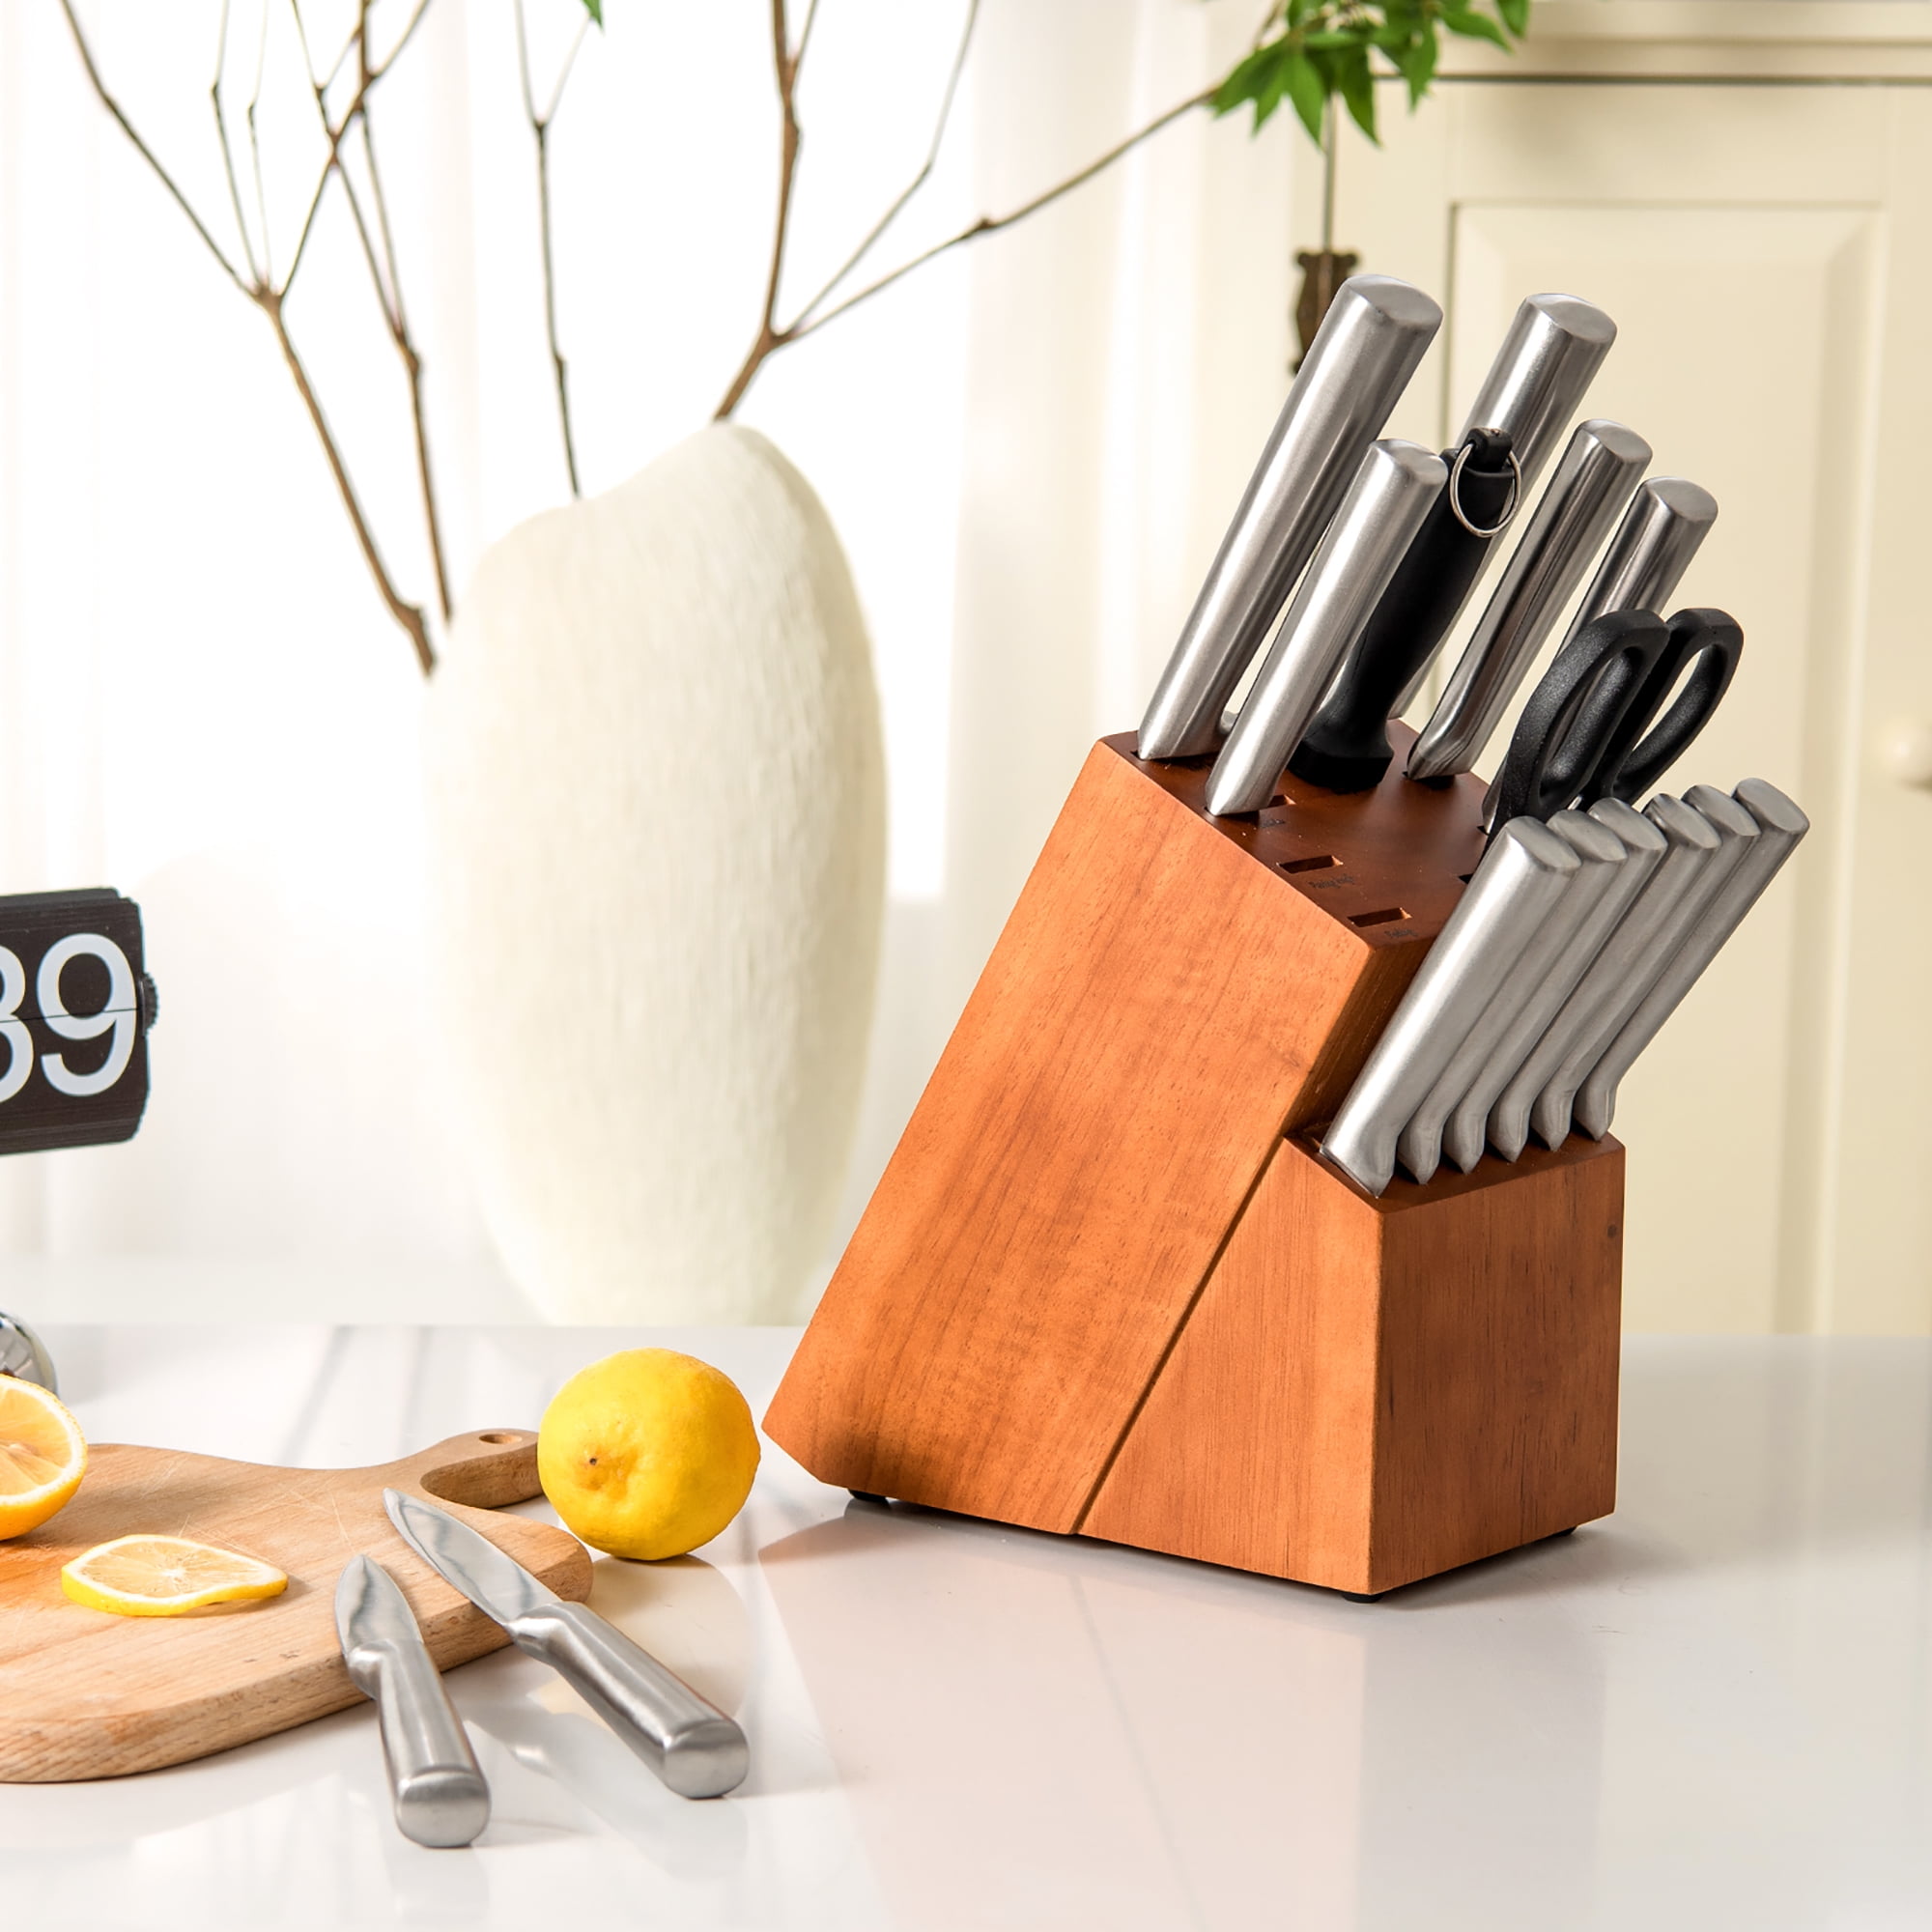 Costway 16-Piece Stainless Steel Knife Set w/Sharpener KC54178 - The Home  Depot